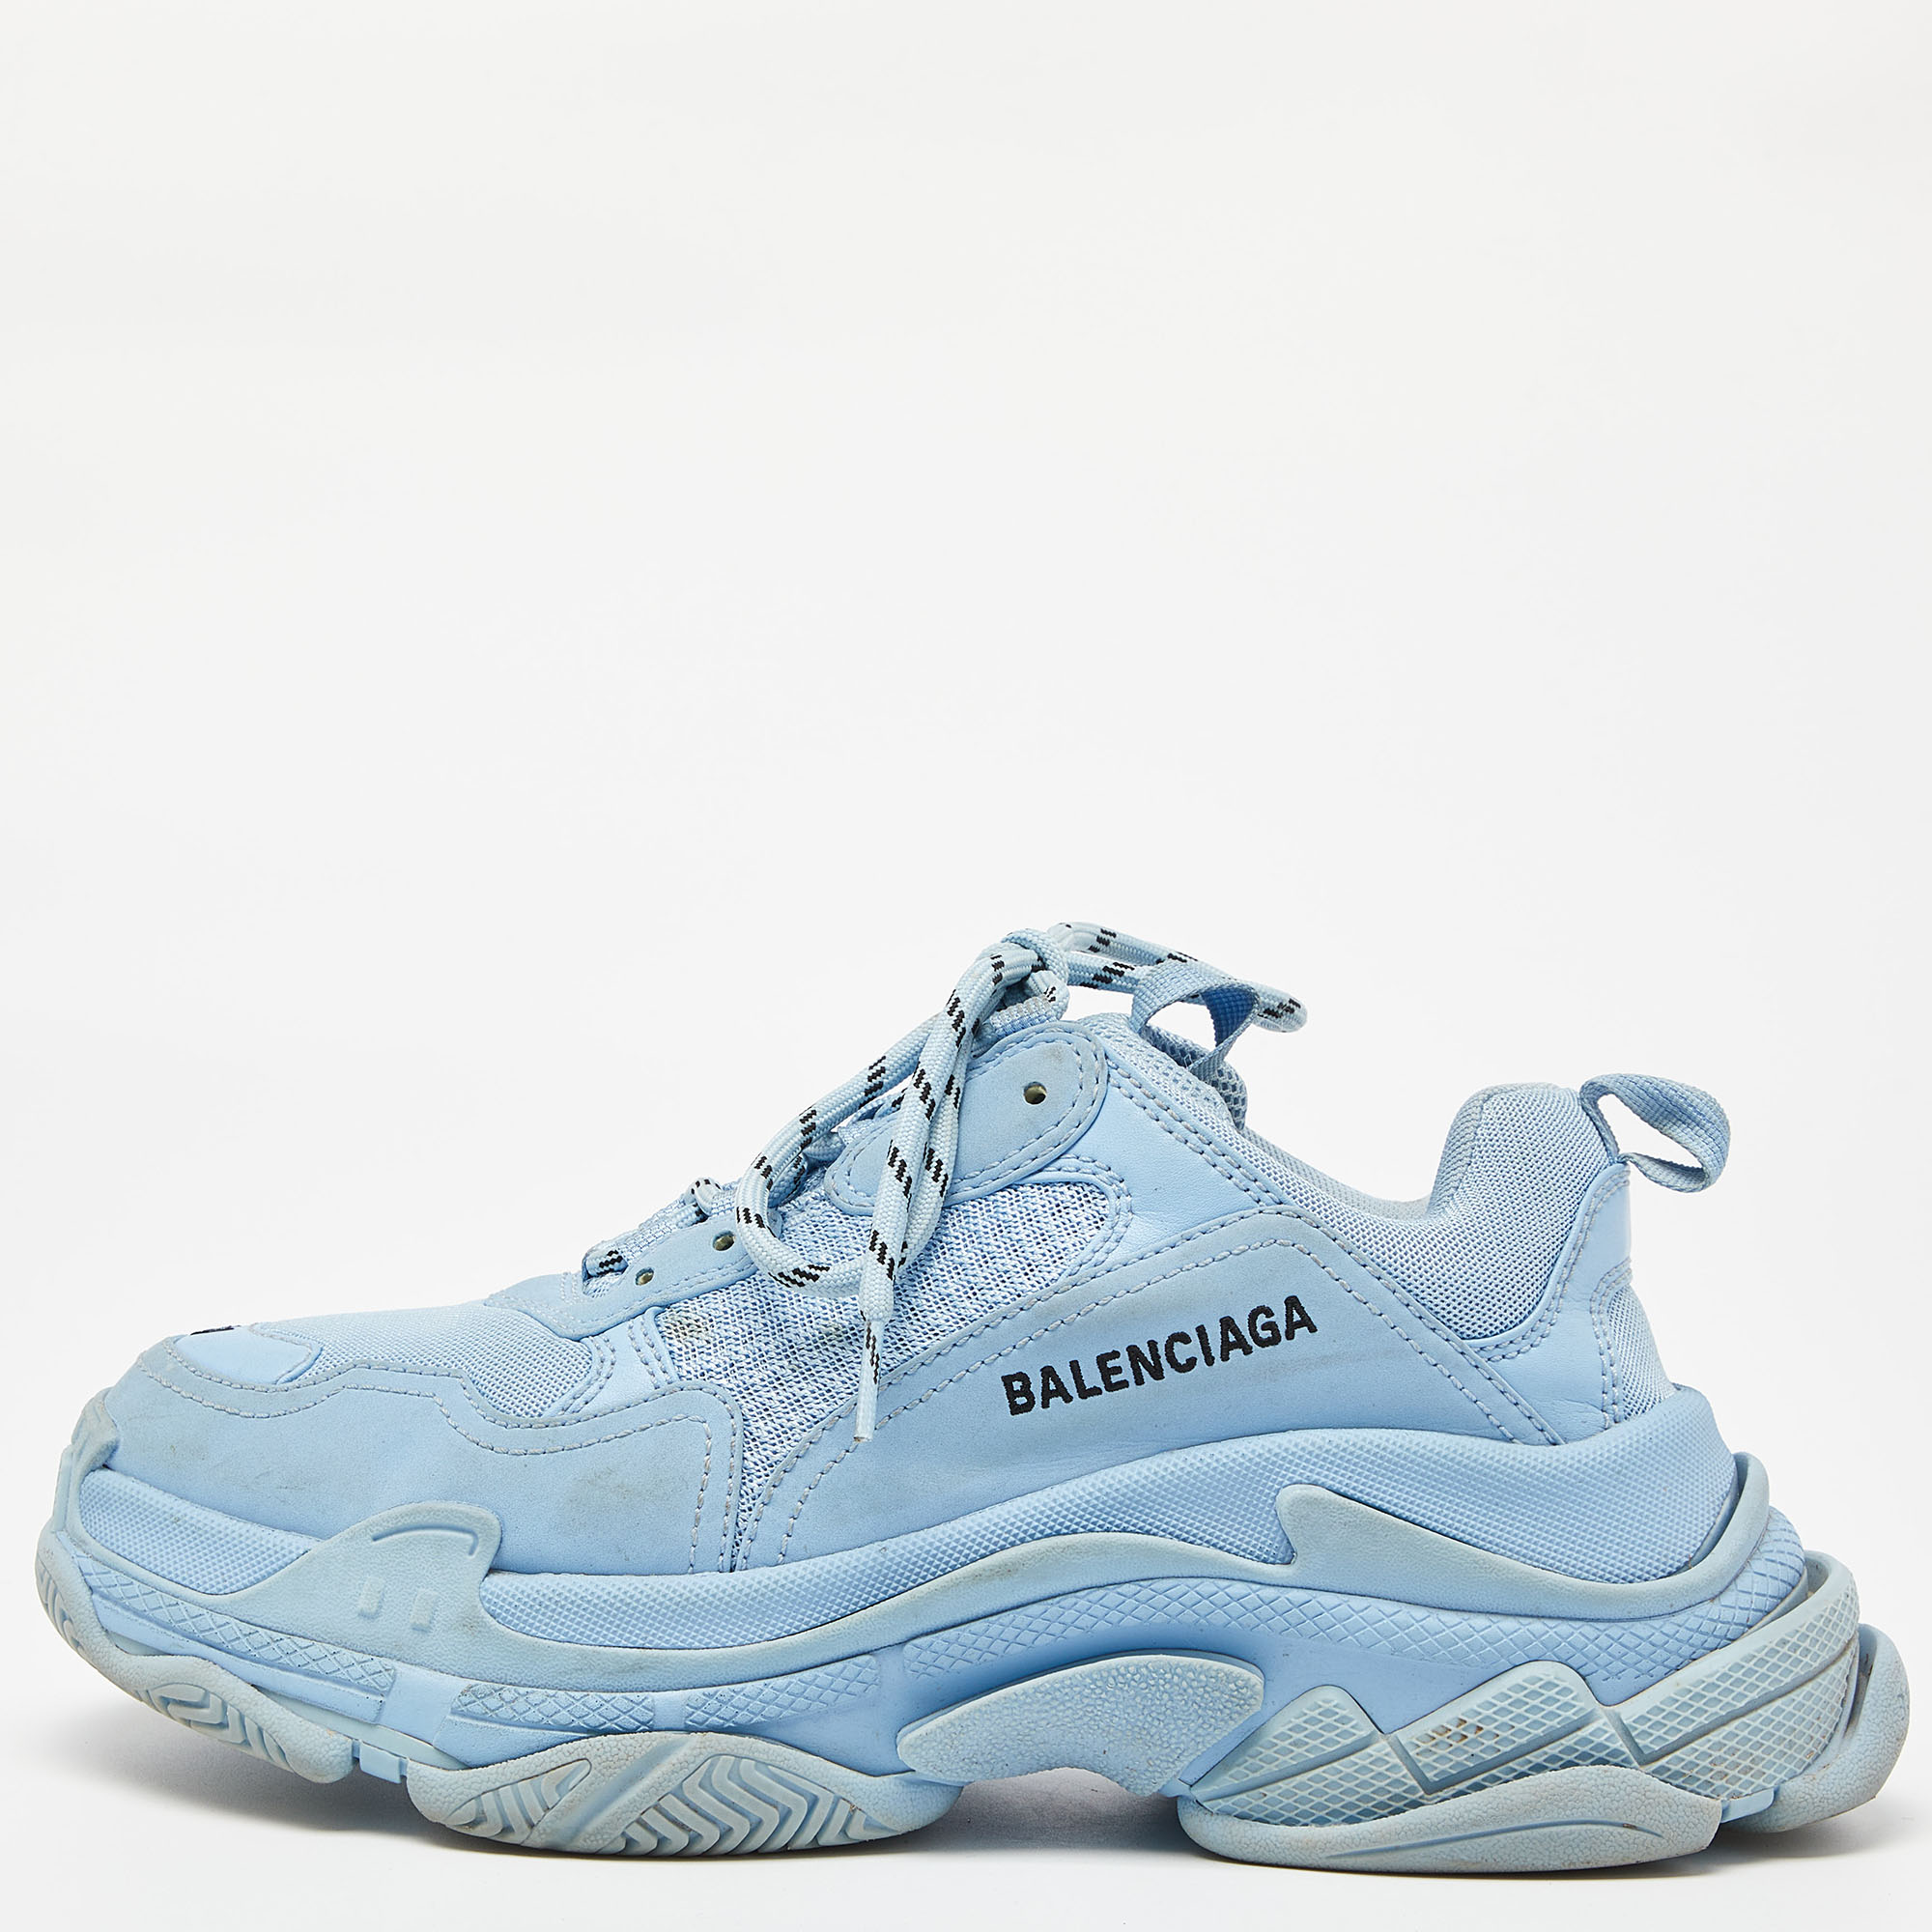 Balenciaga blue mesh and faux leather triple s low top sneakers size 40